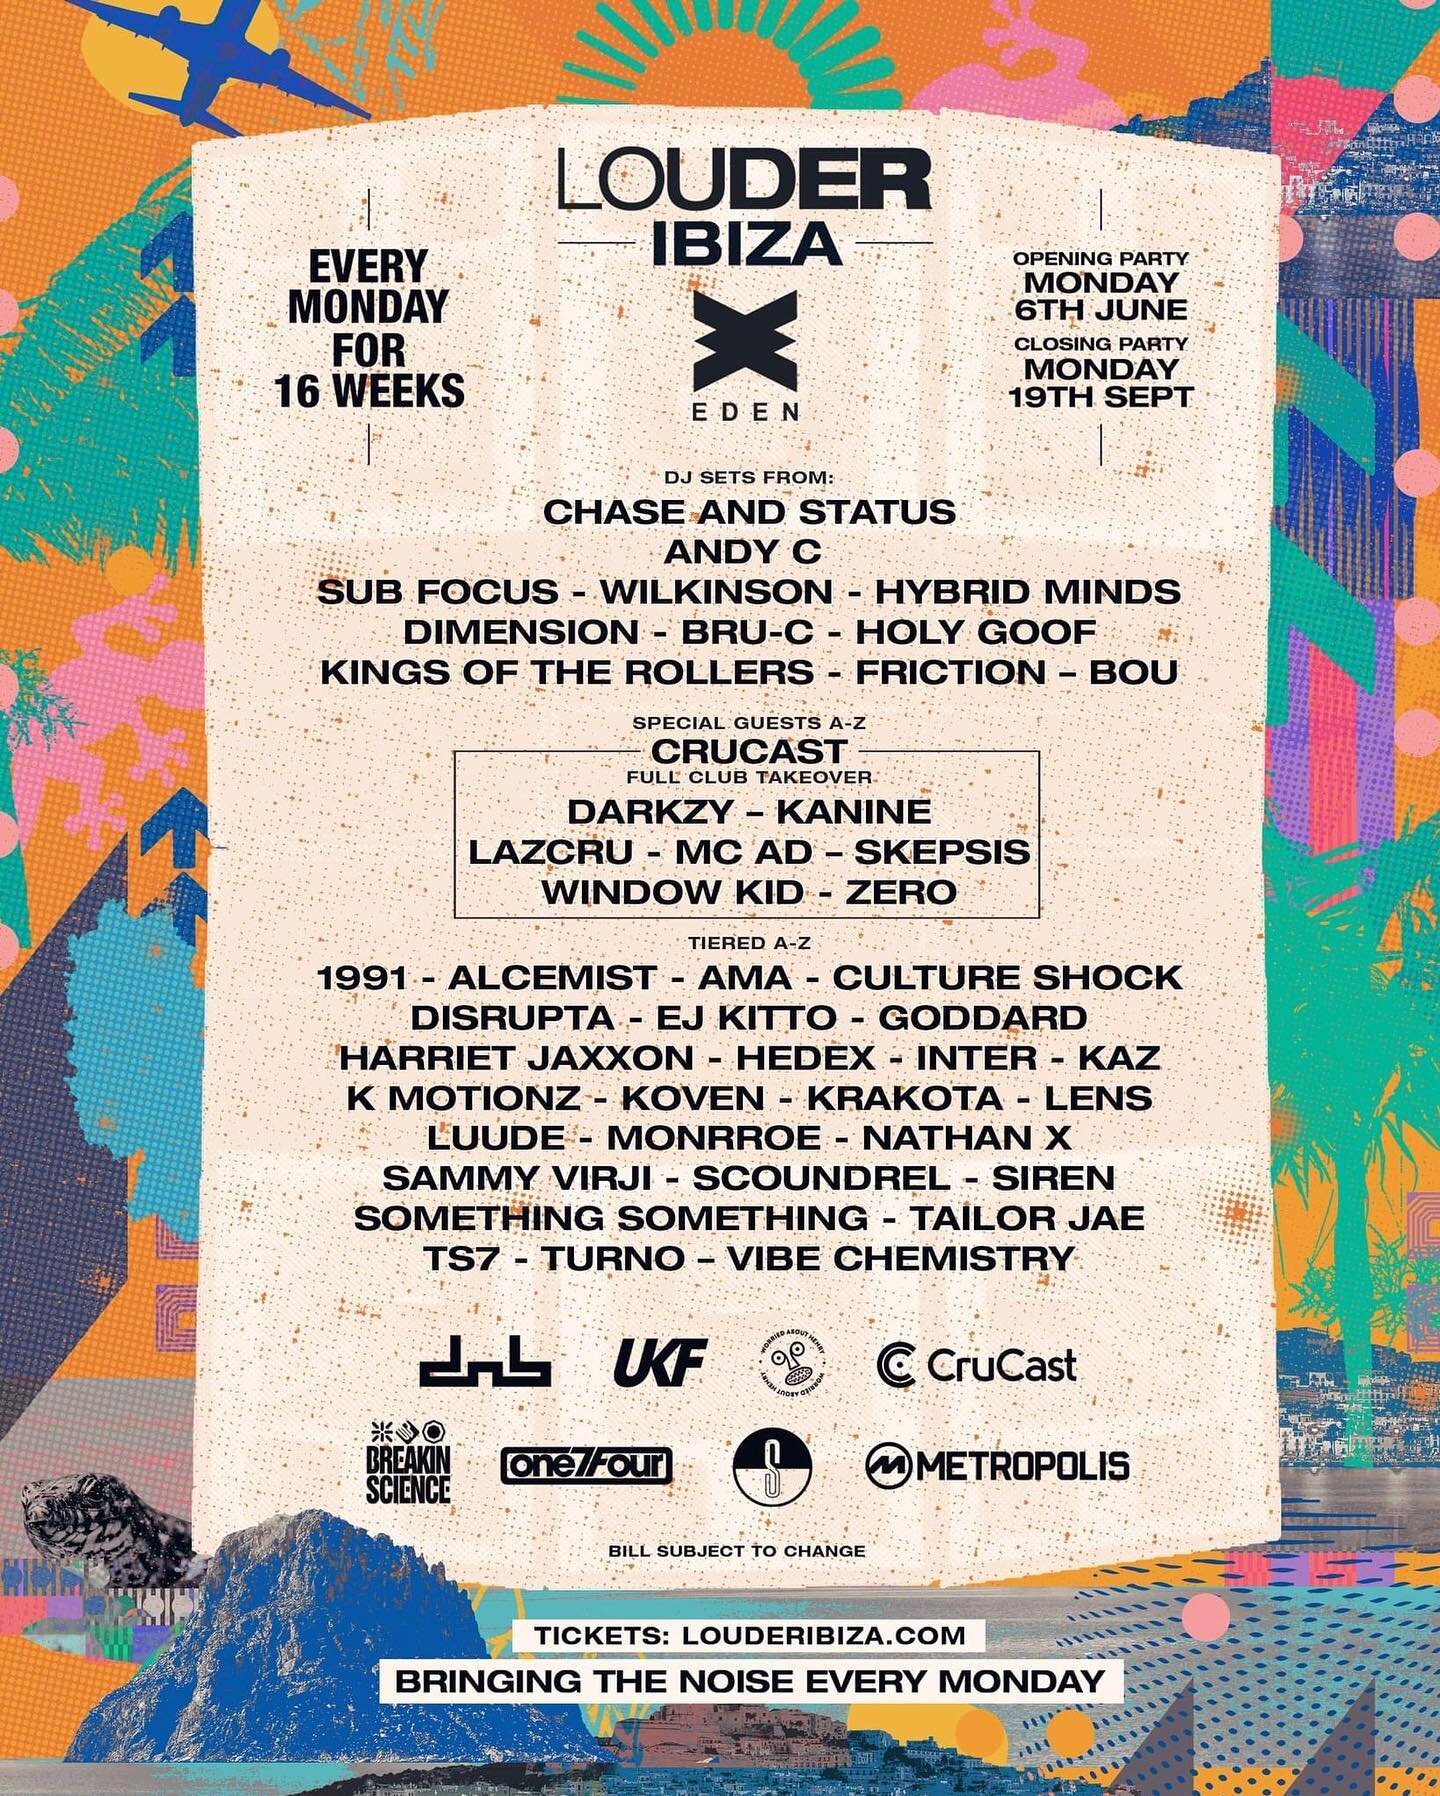 This is the one we been waiting for. Summer is officially returning. BACK ON THE ISLAND 🇪🇸🔥 Sign up for tickets: louderibiza.com  #protectandtour
#tourmanager #toursupport #theresnostoppingus #tourlife #nosleep #globetrotter #advancing #backstage 